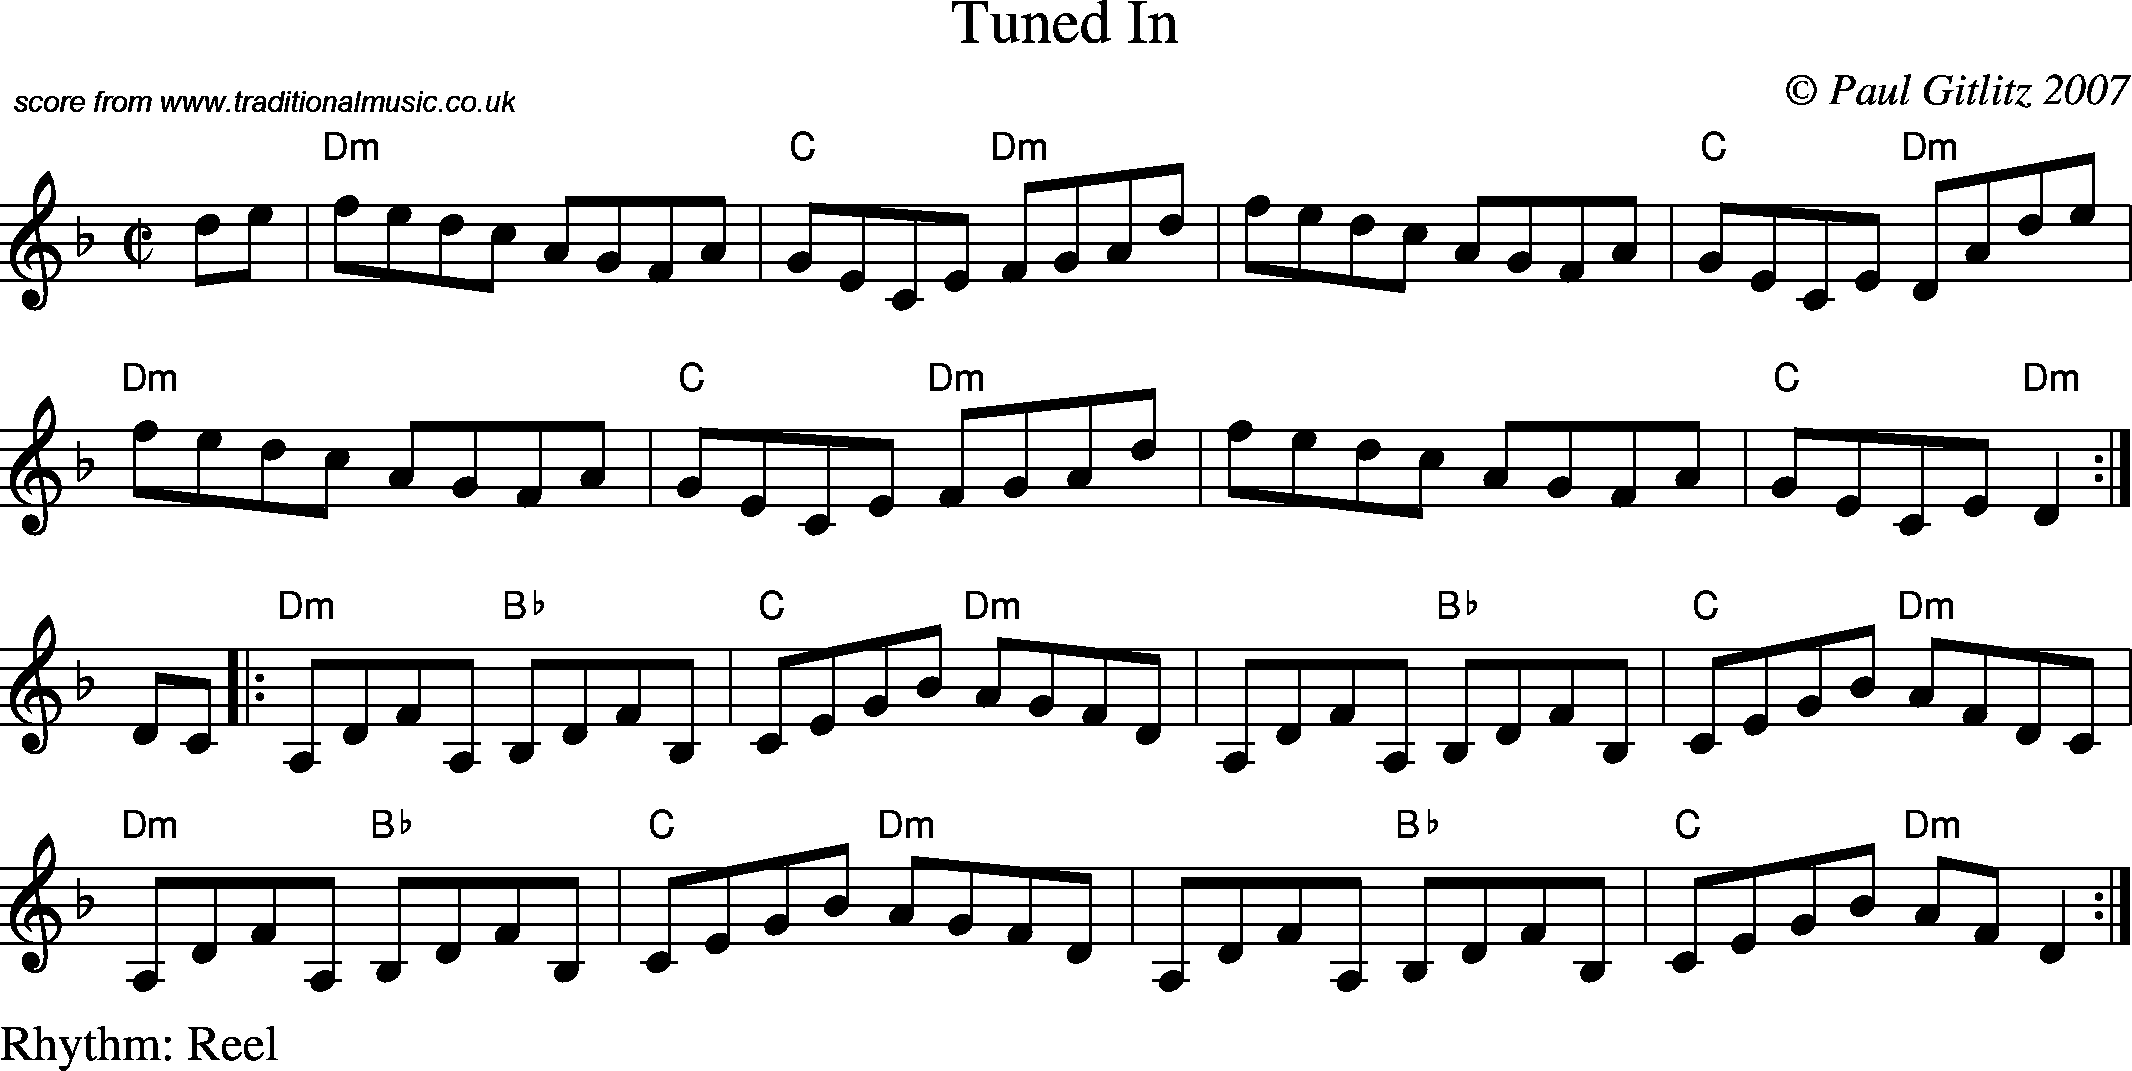 Sheet Music Score for Reel - Tuned In